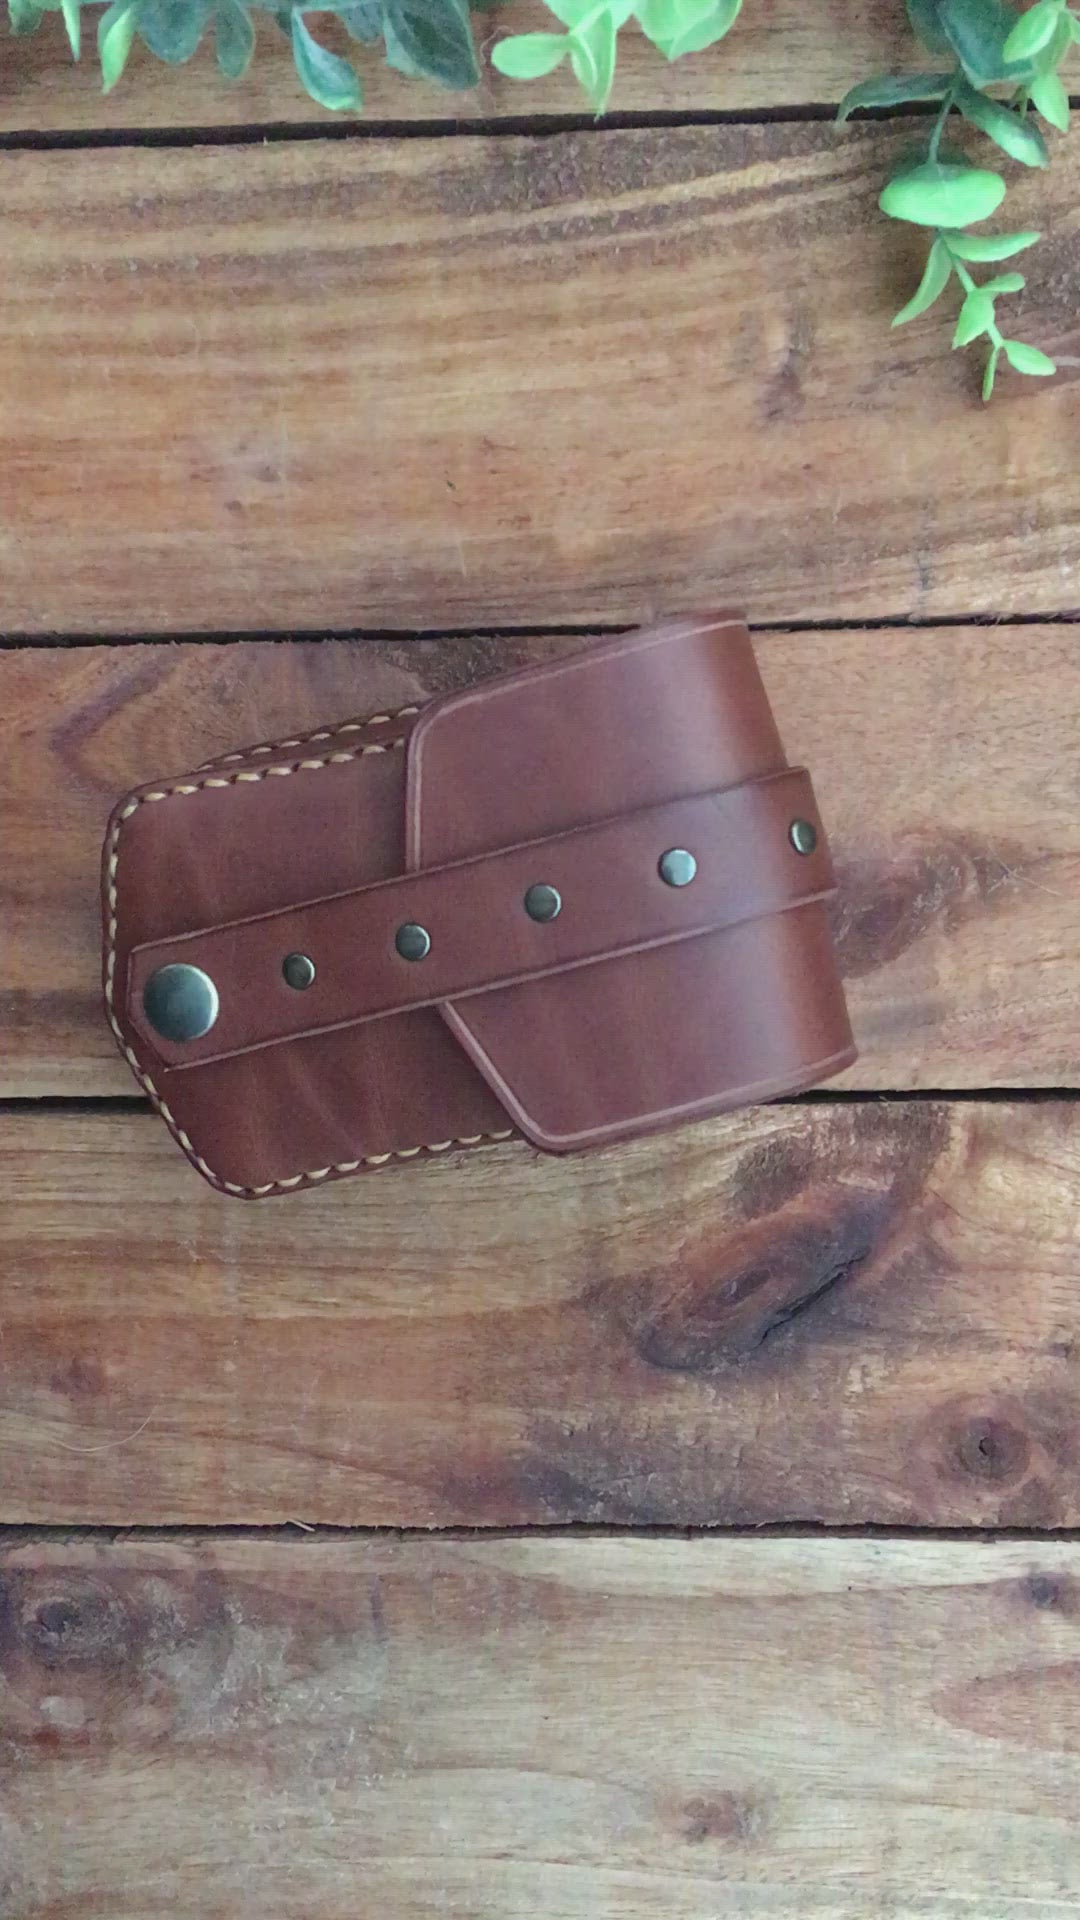 Video showing a Handmade Brown mini leather belt pouch for credit cards